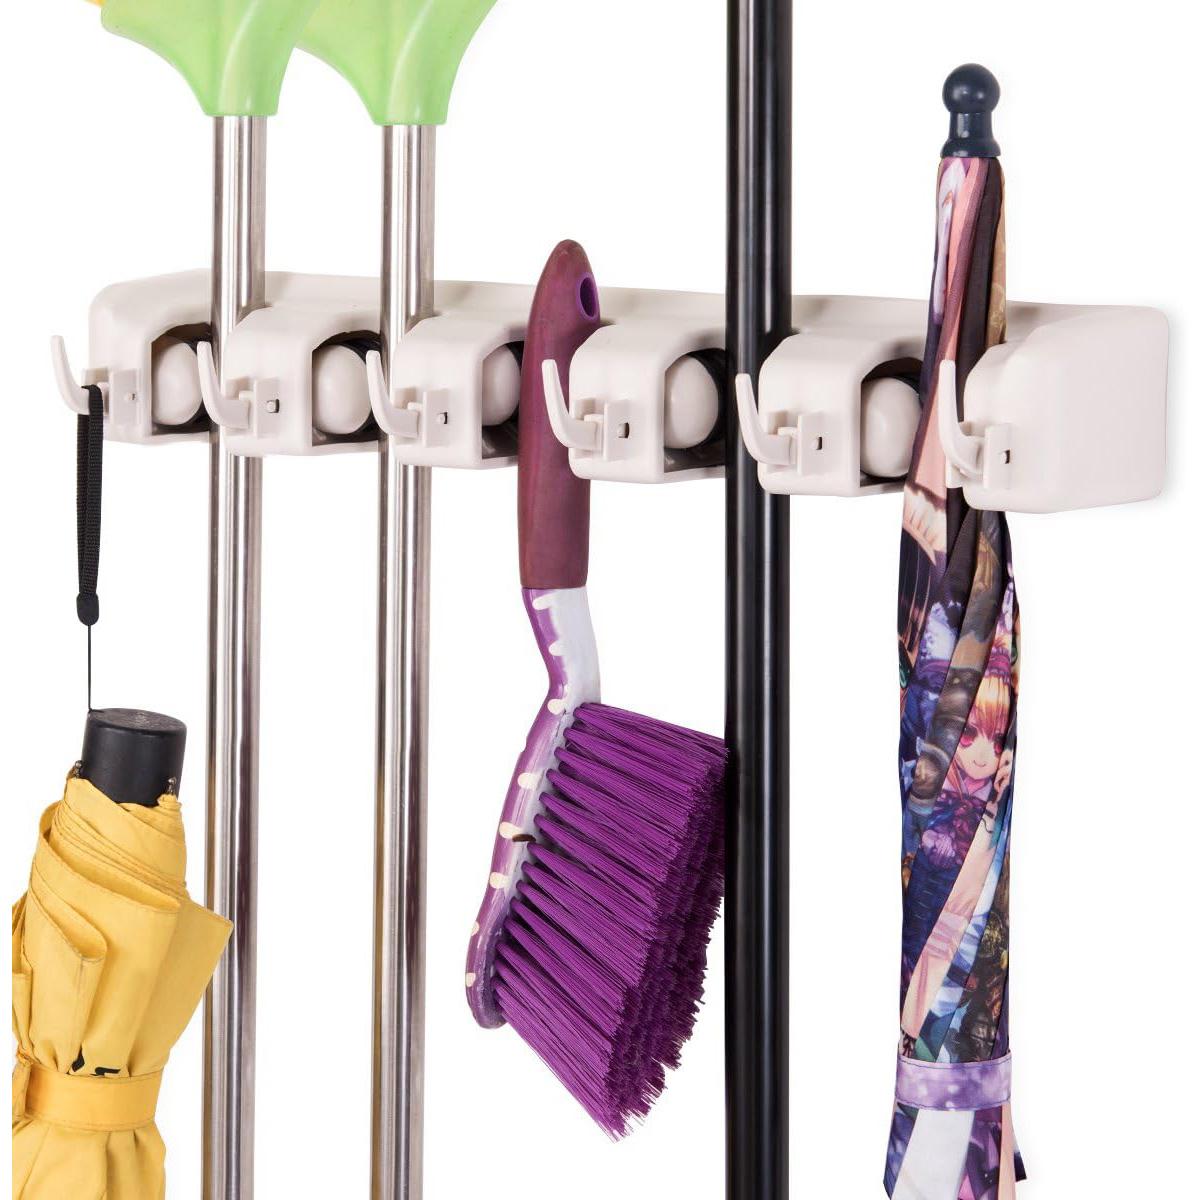 Broom Holder Wall Mount and Garden Tool Organizer for $6.89